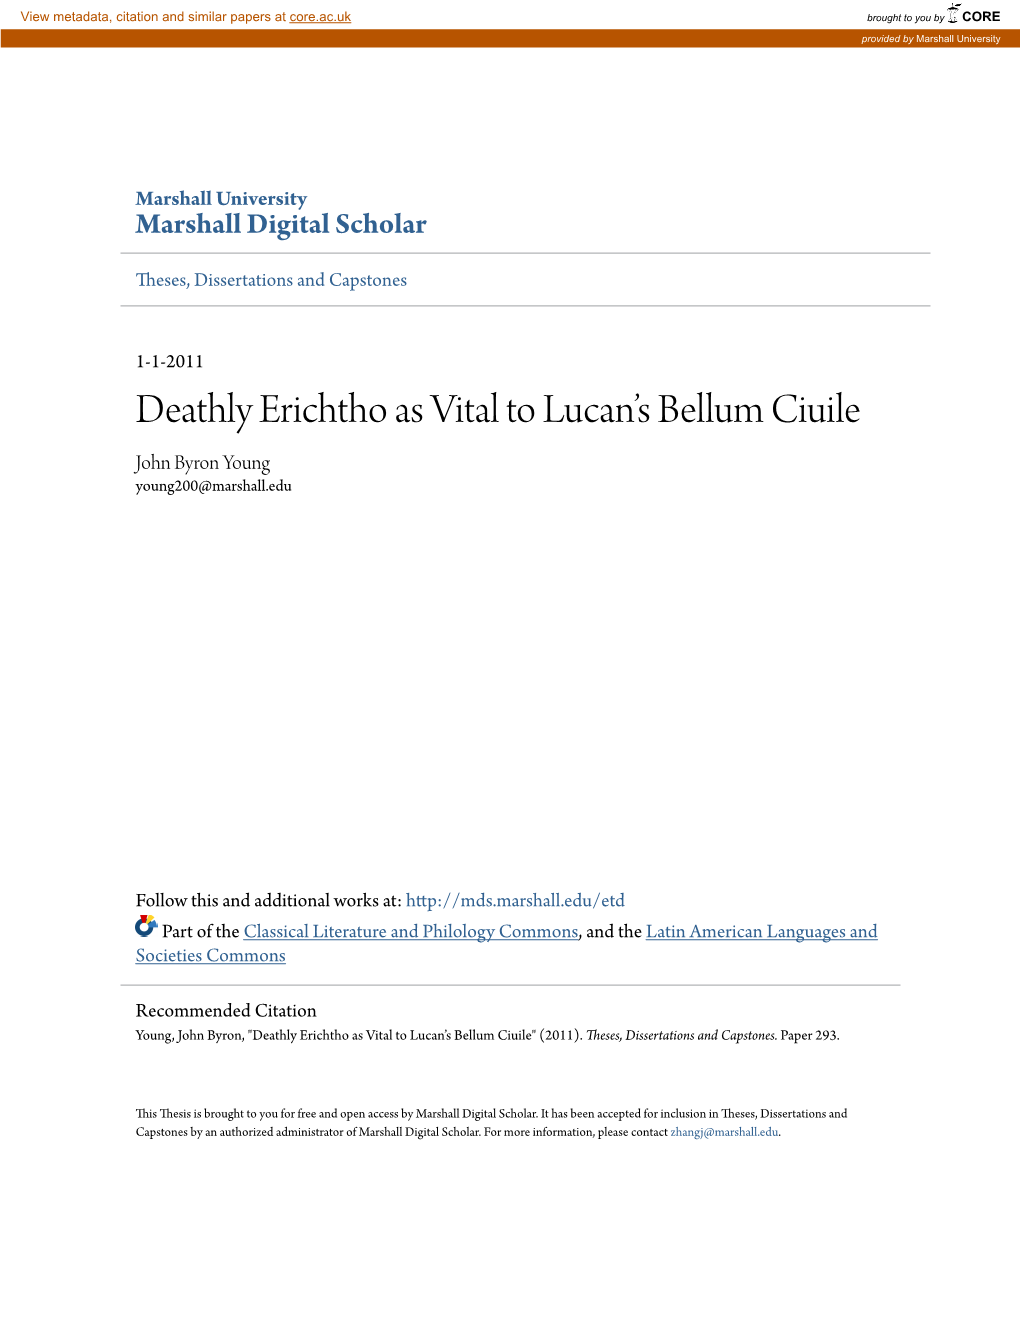 Deathly Erichtho As Vital to Lucan's Bellum Ciuile